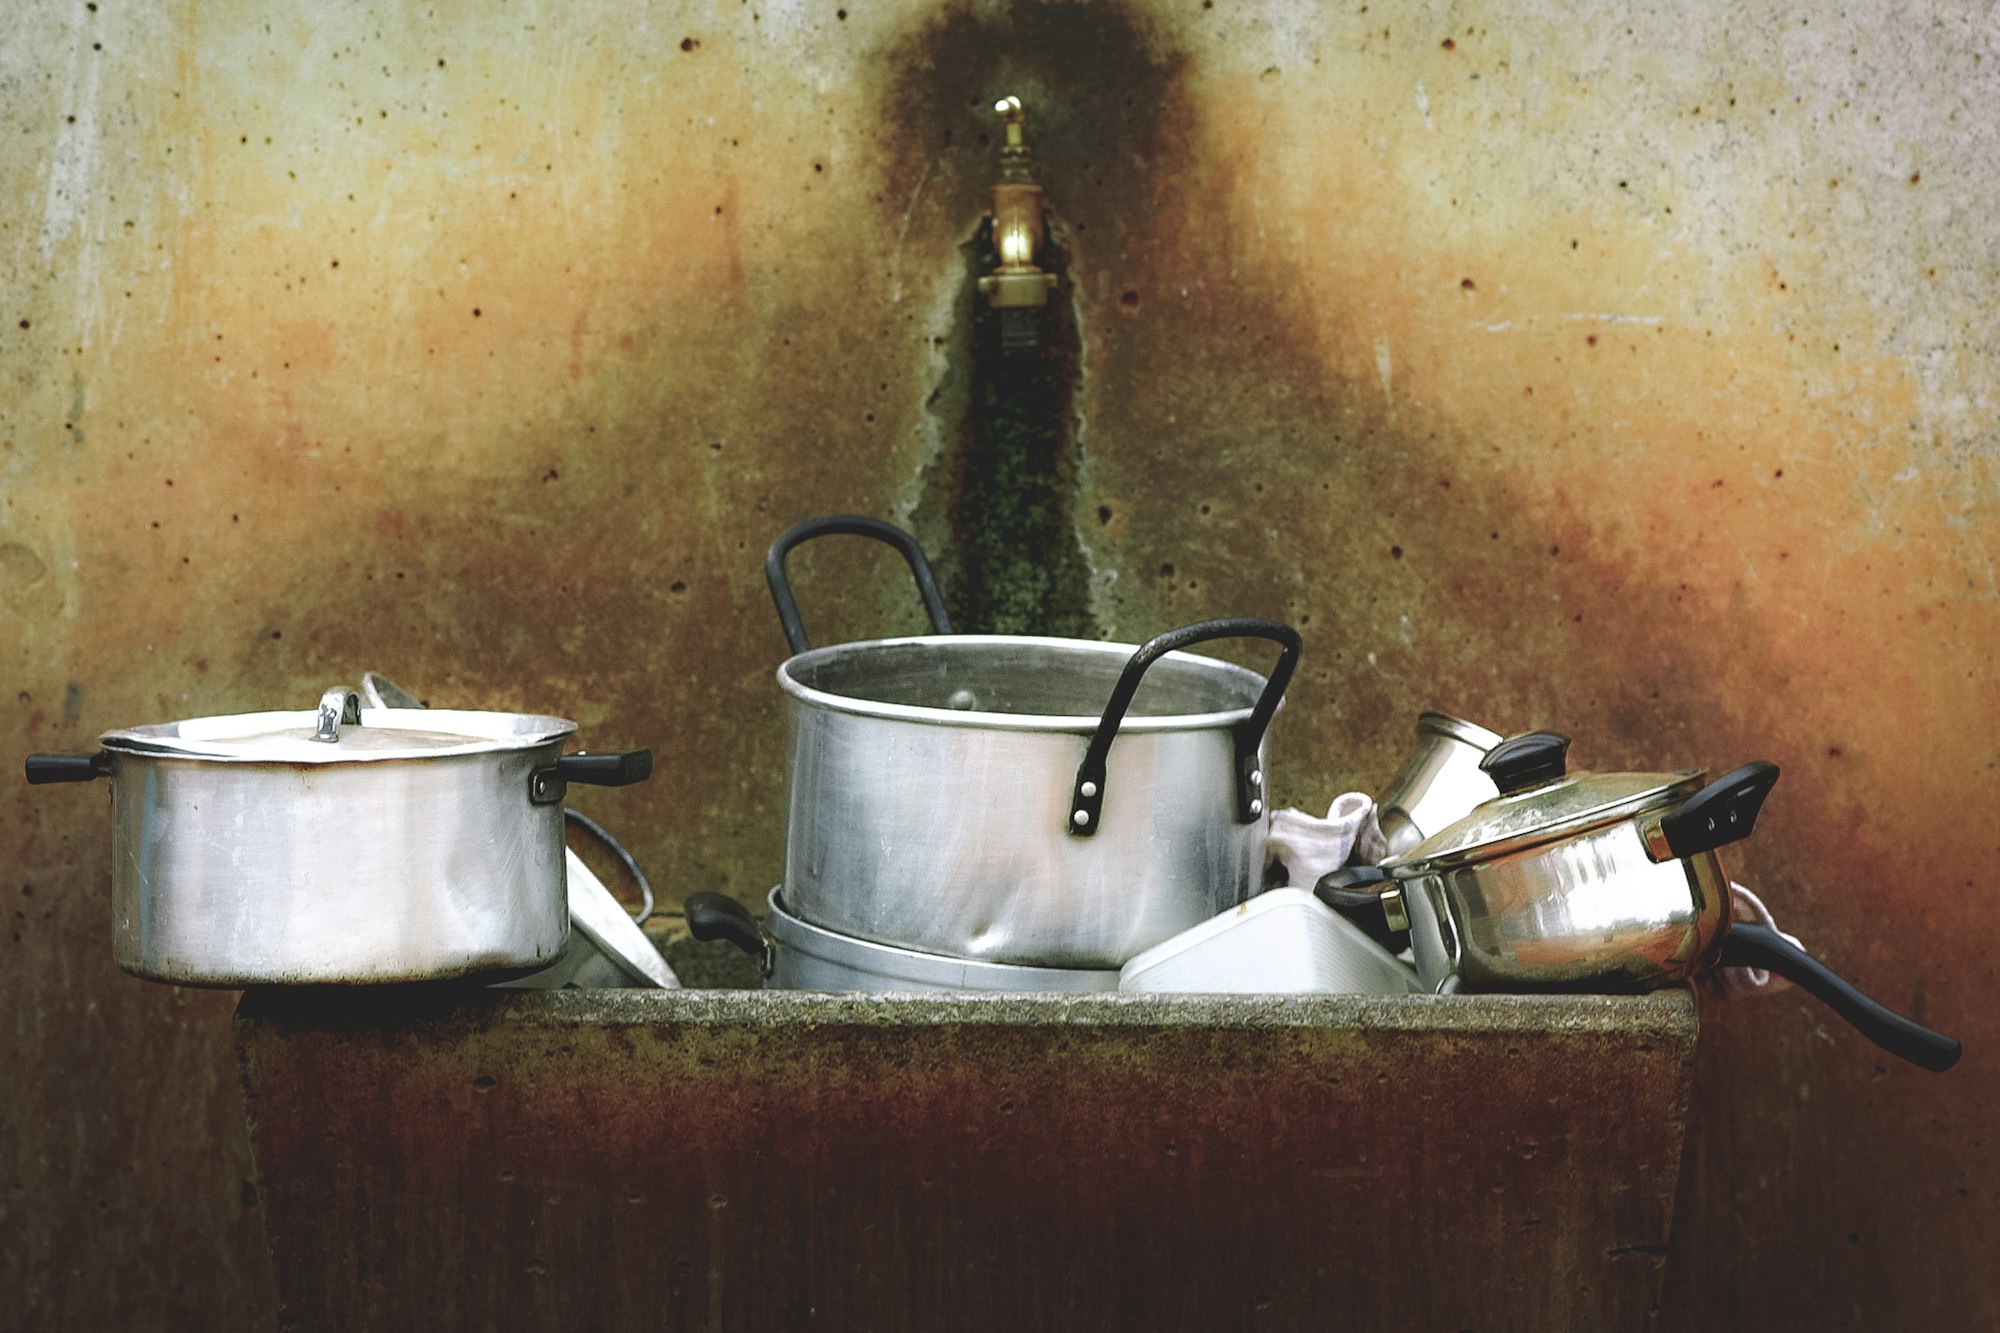 You can wash your camping cookware easily.